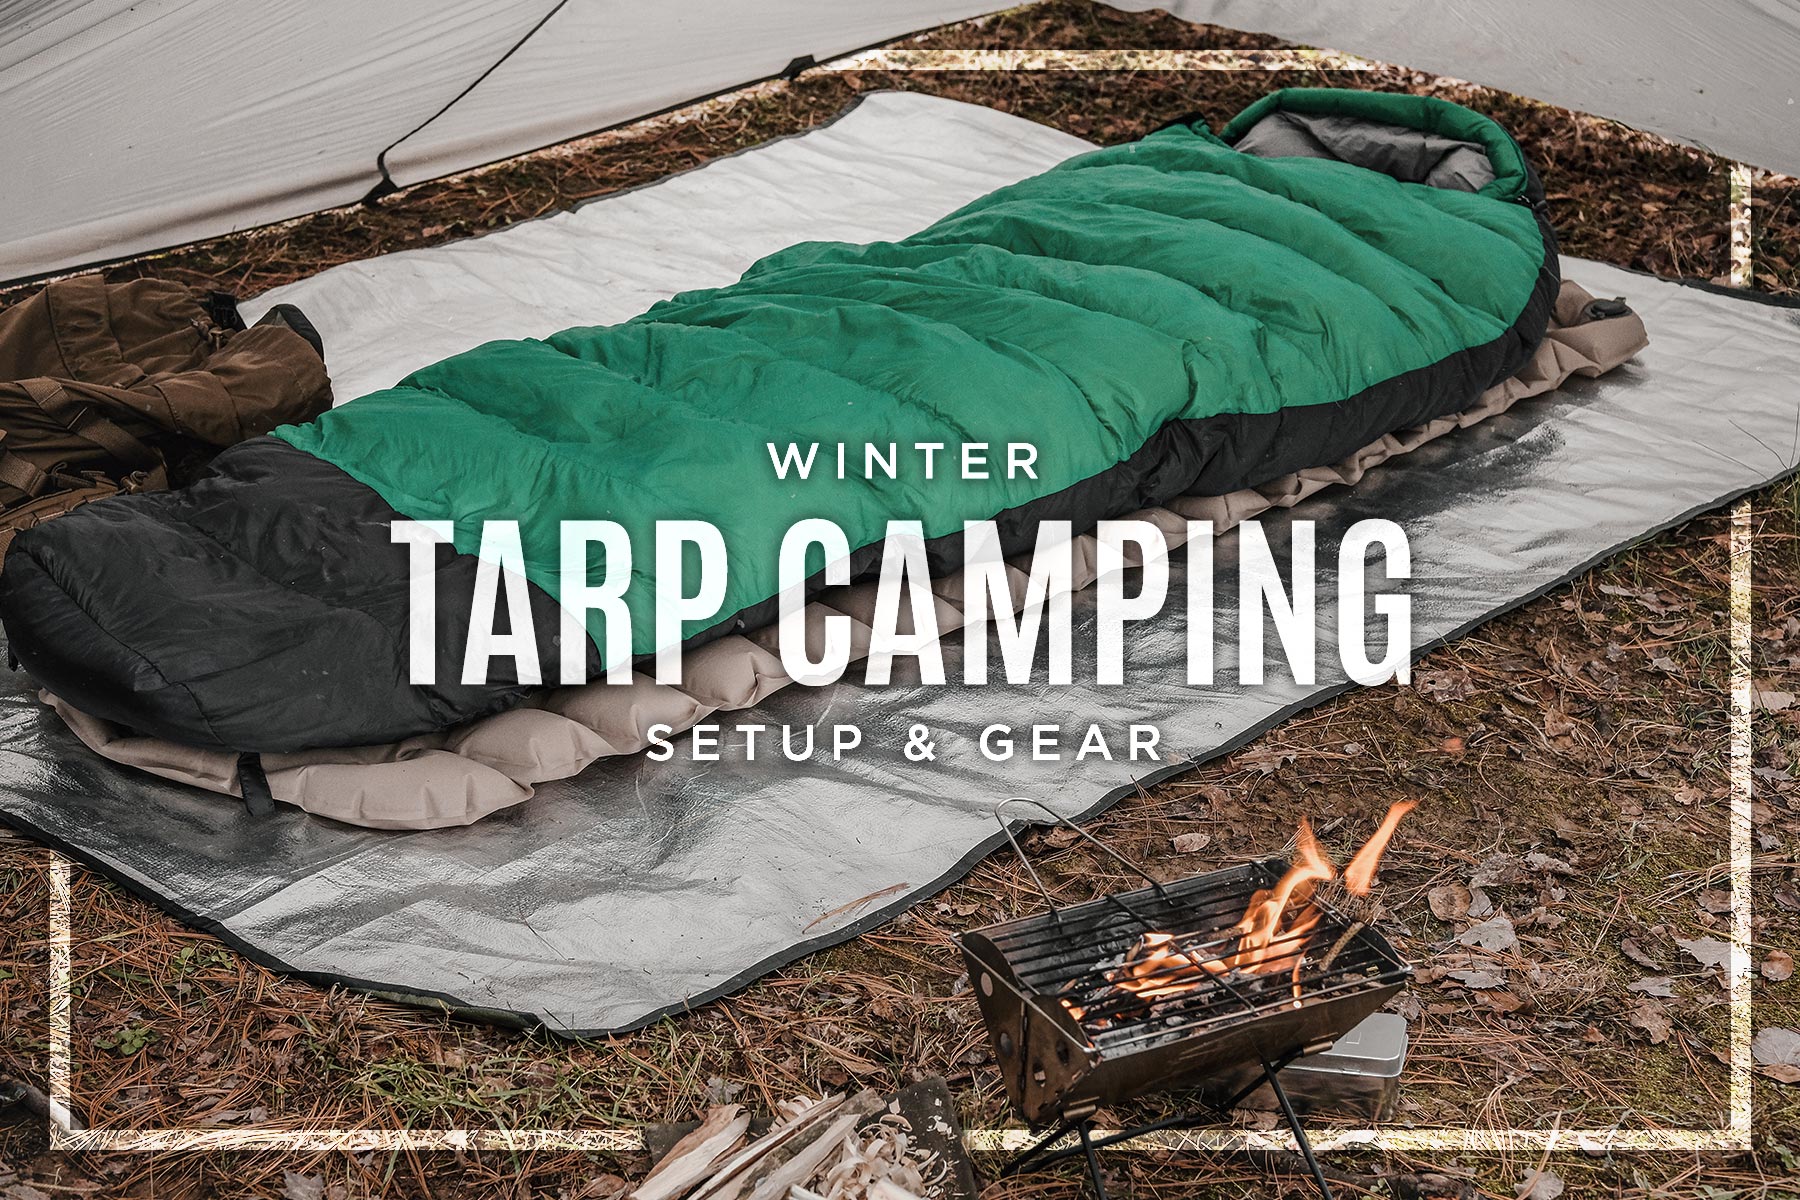 Winter Tarp Camping Setup • The best gear from the ground up!